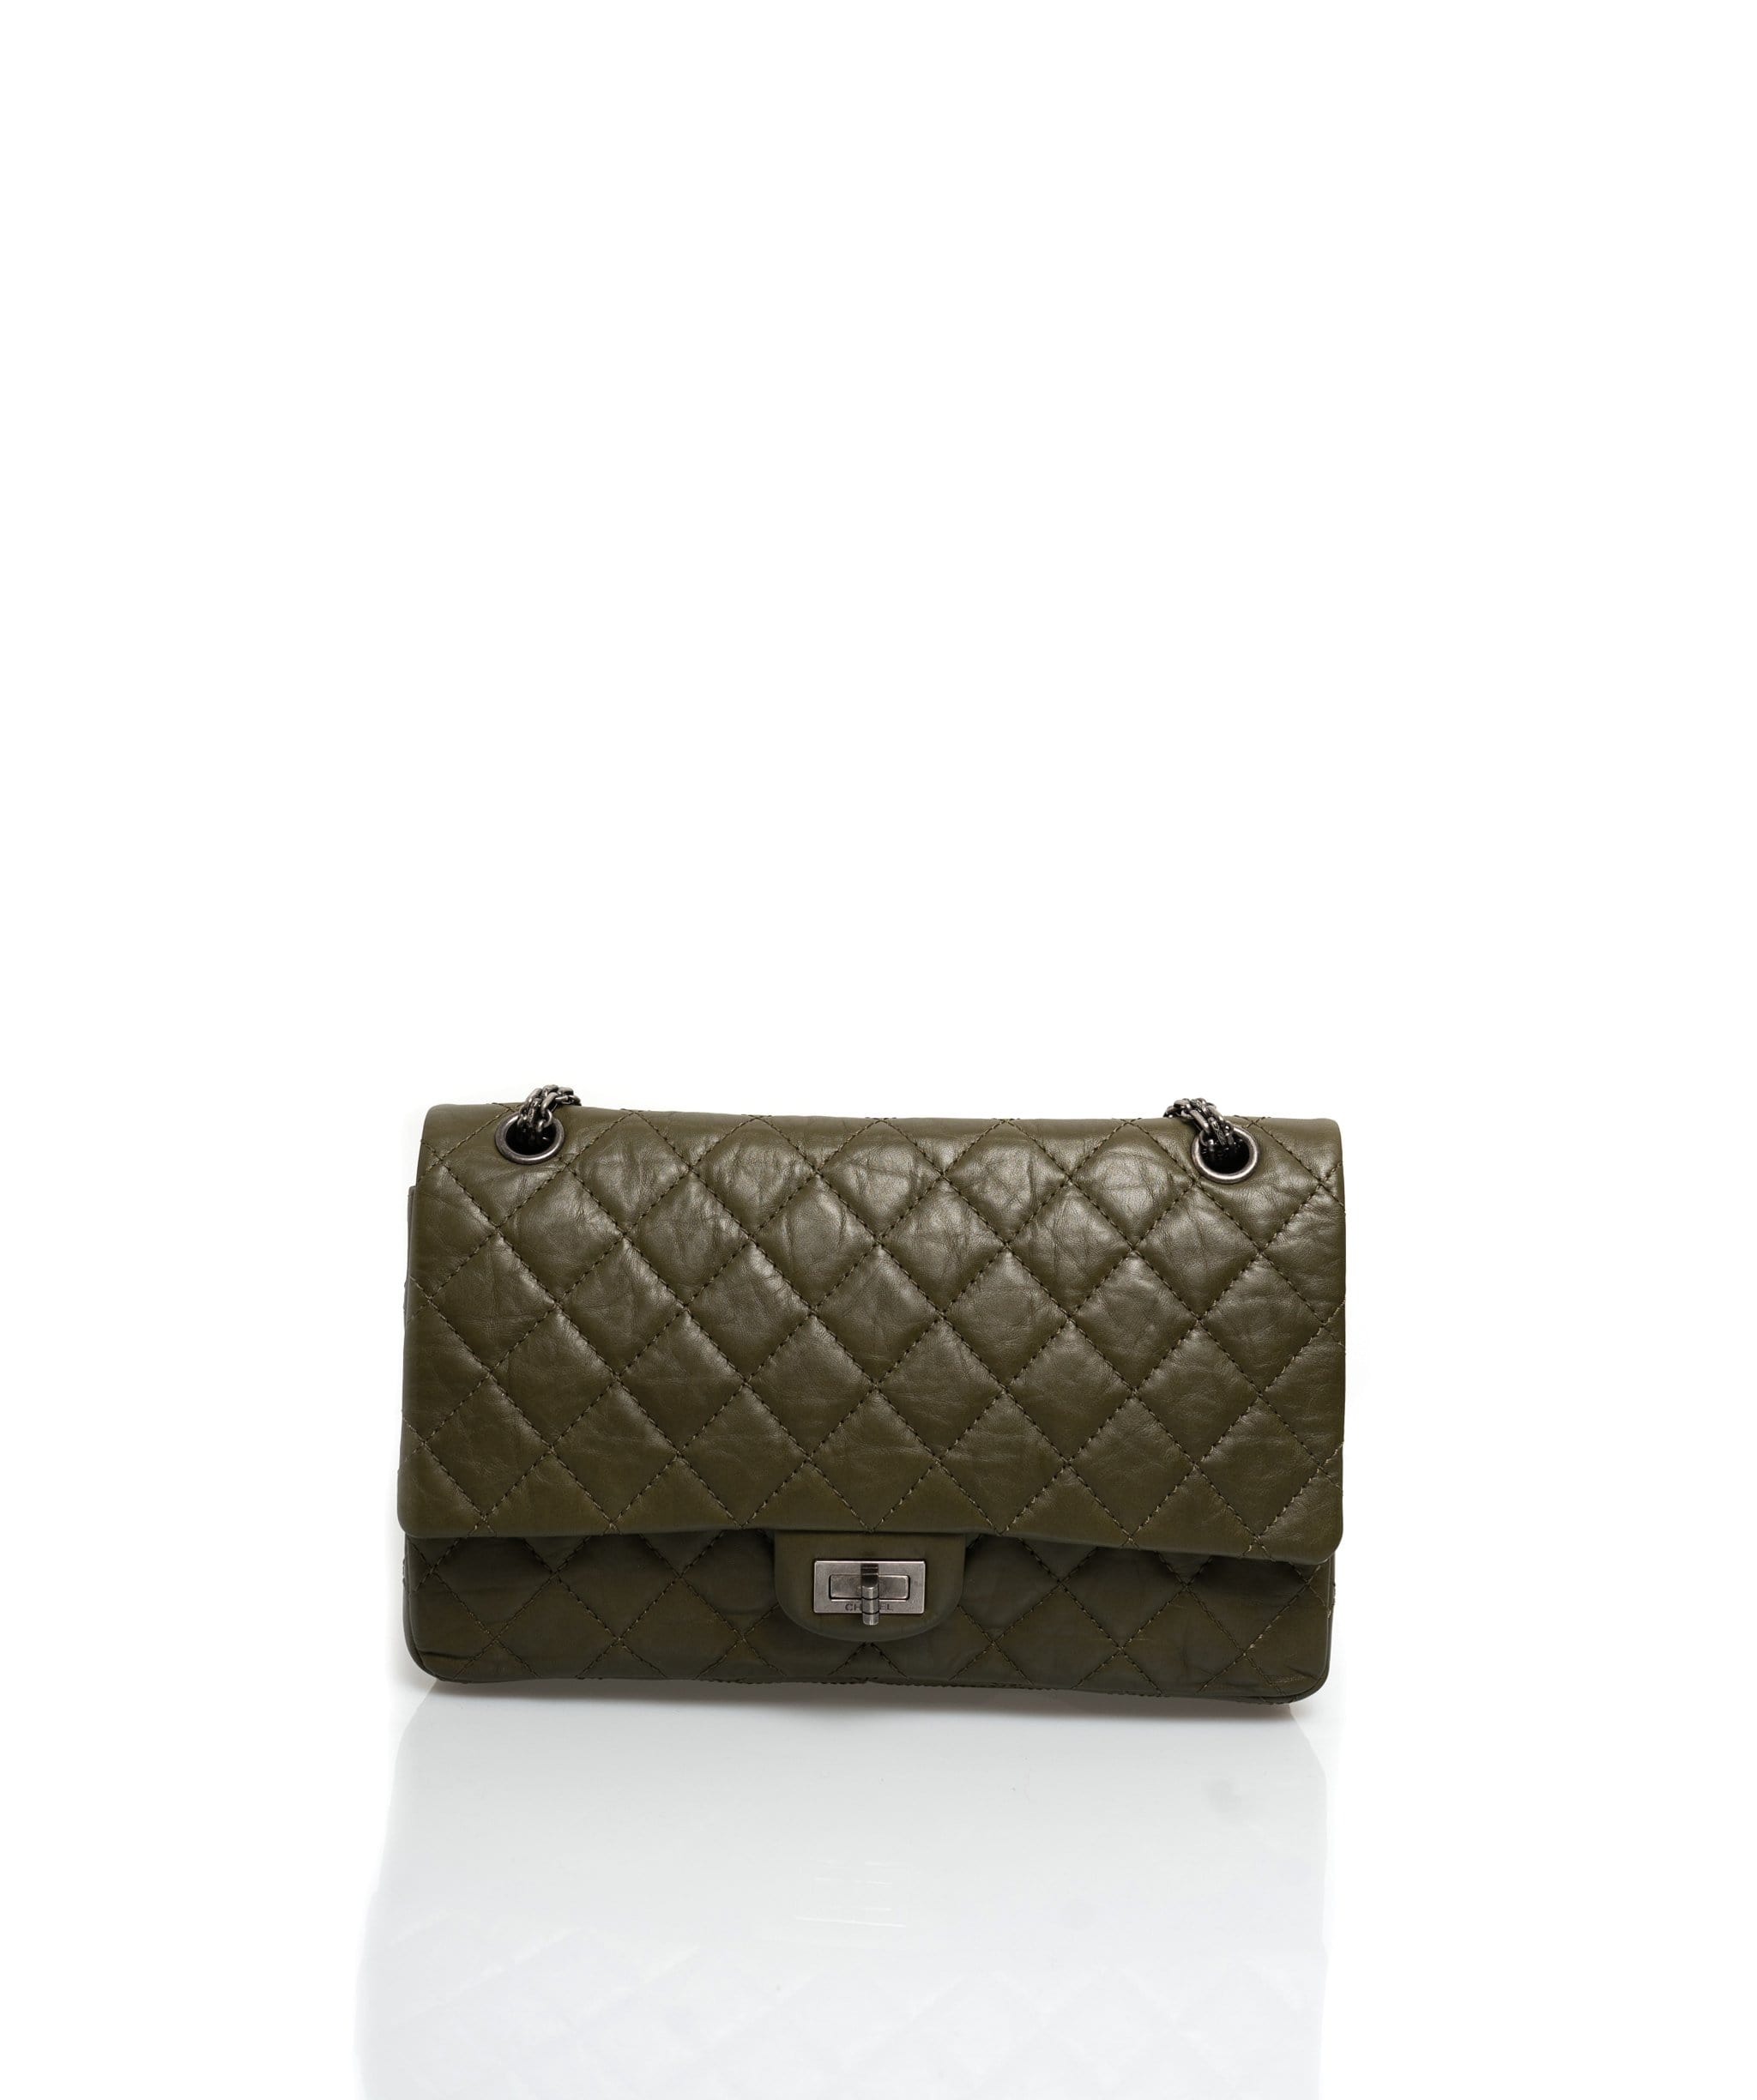 Chanel Black Quilted Aged Calfskin 2.55 Reissue 225 Hanger Flap